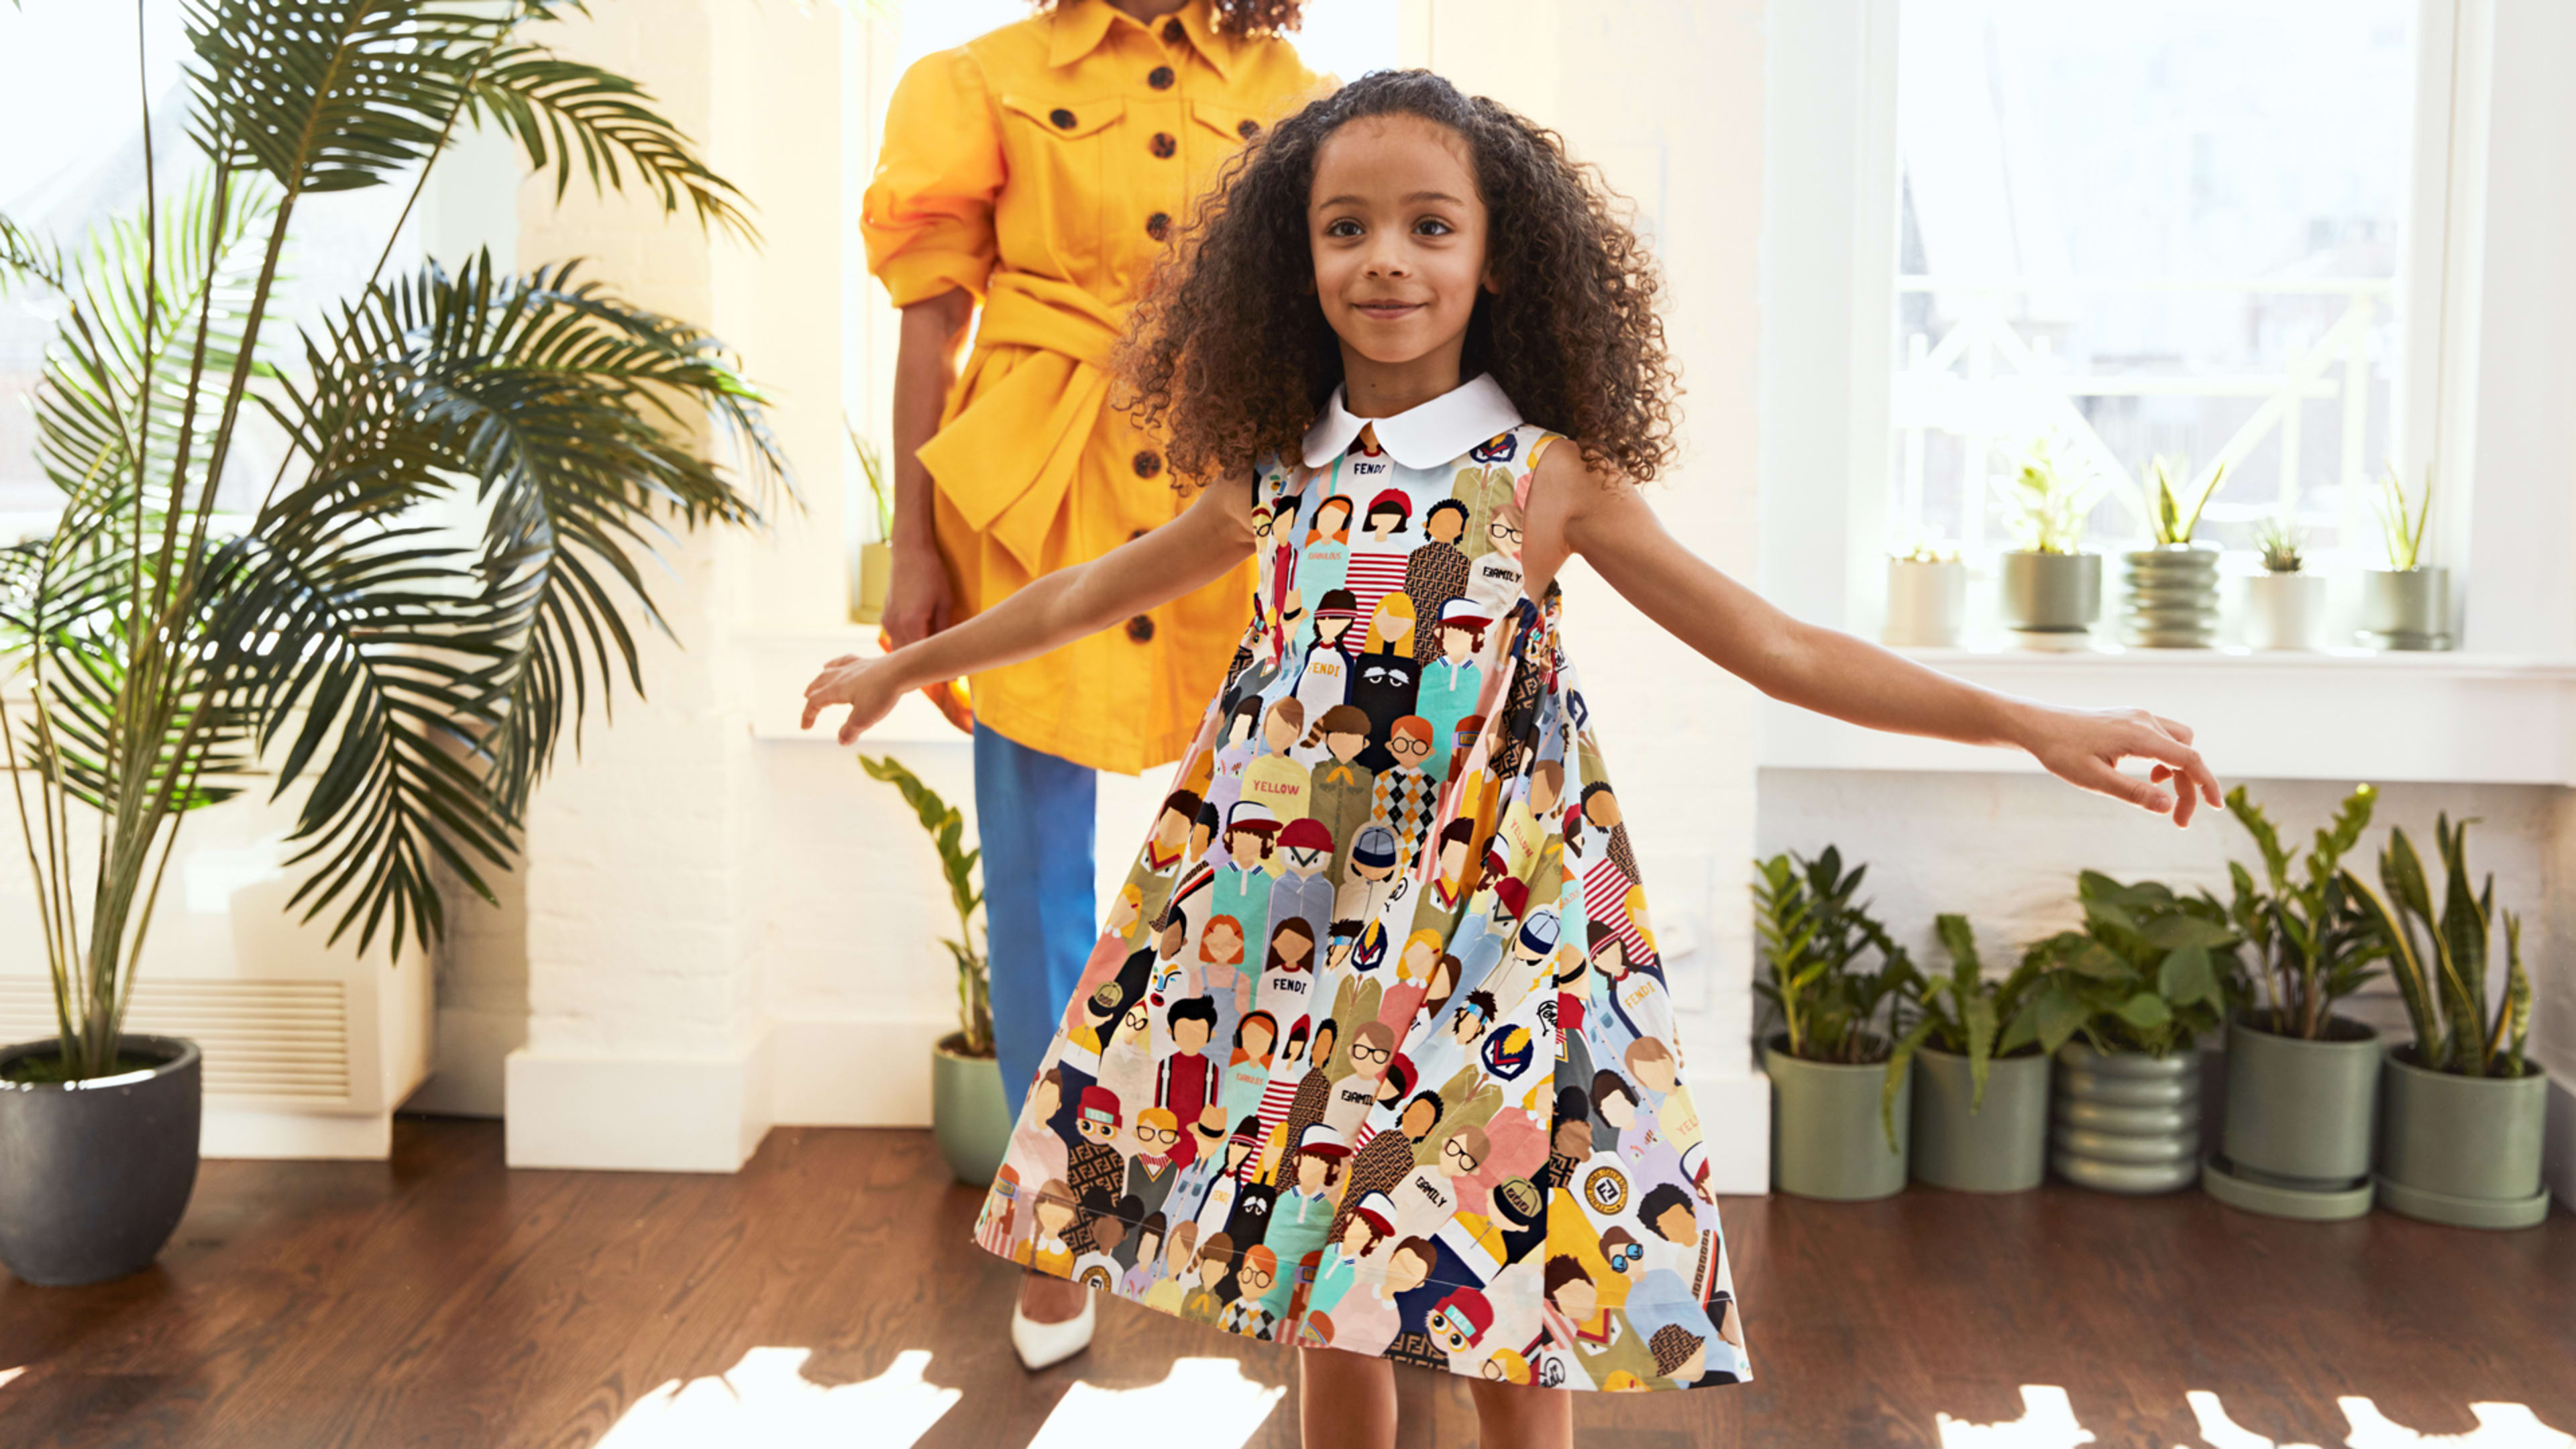 Parents, you can now rent children’s clothing from Rent the Runway